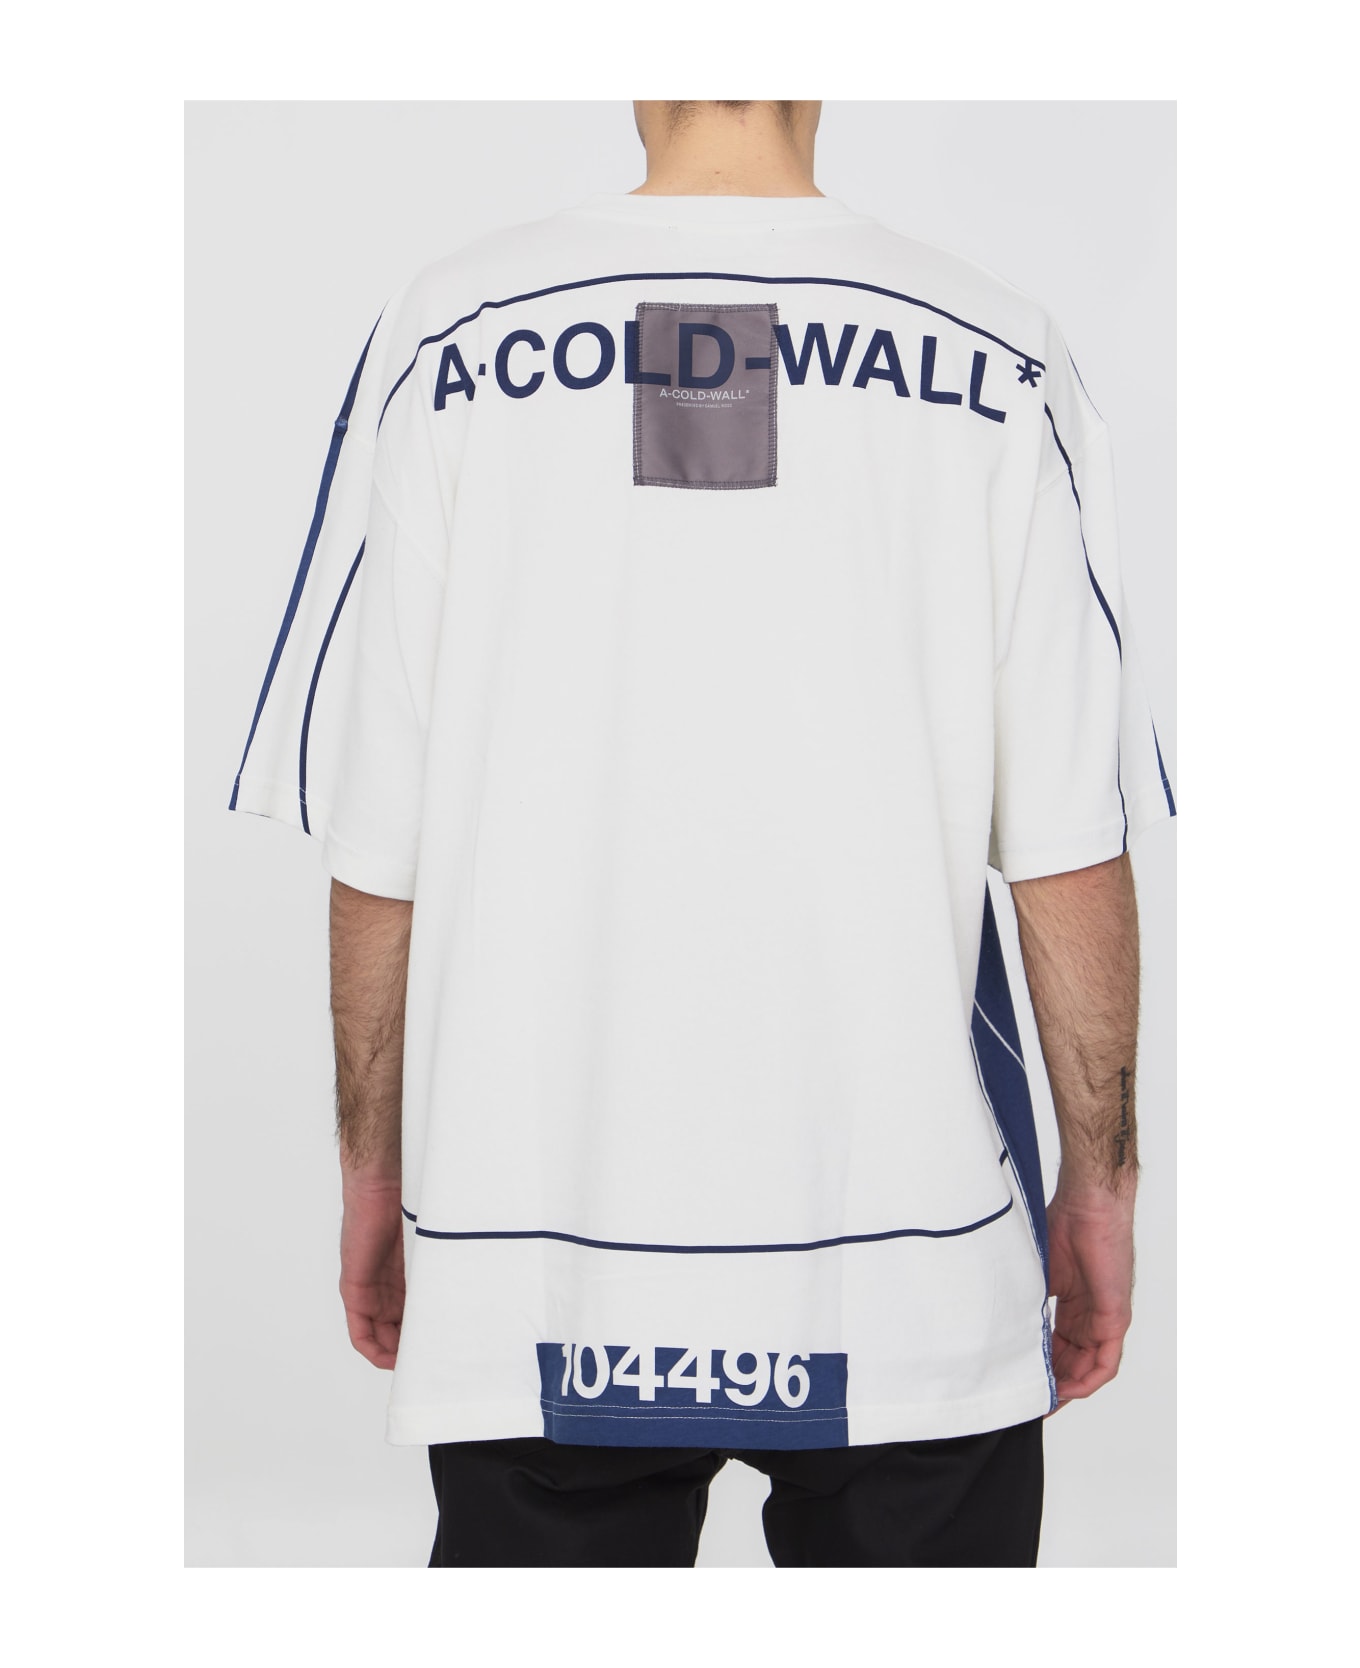 A-COLD-WALL Exposure T-shirt - WHITE